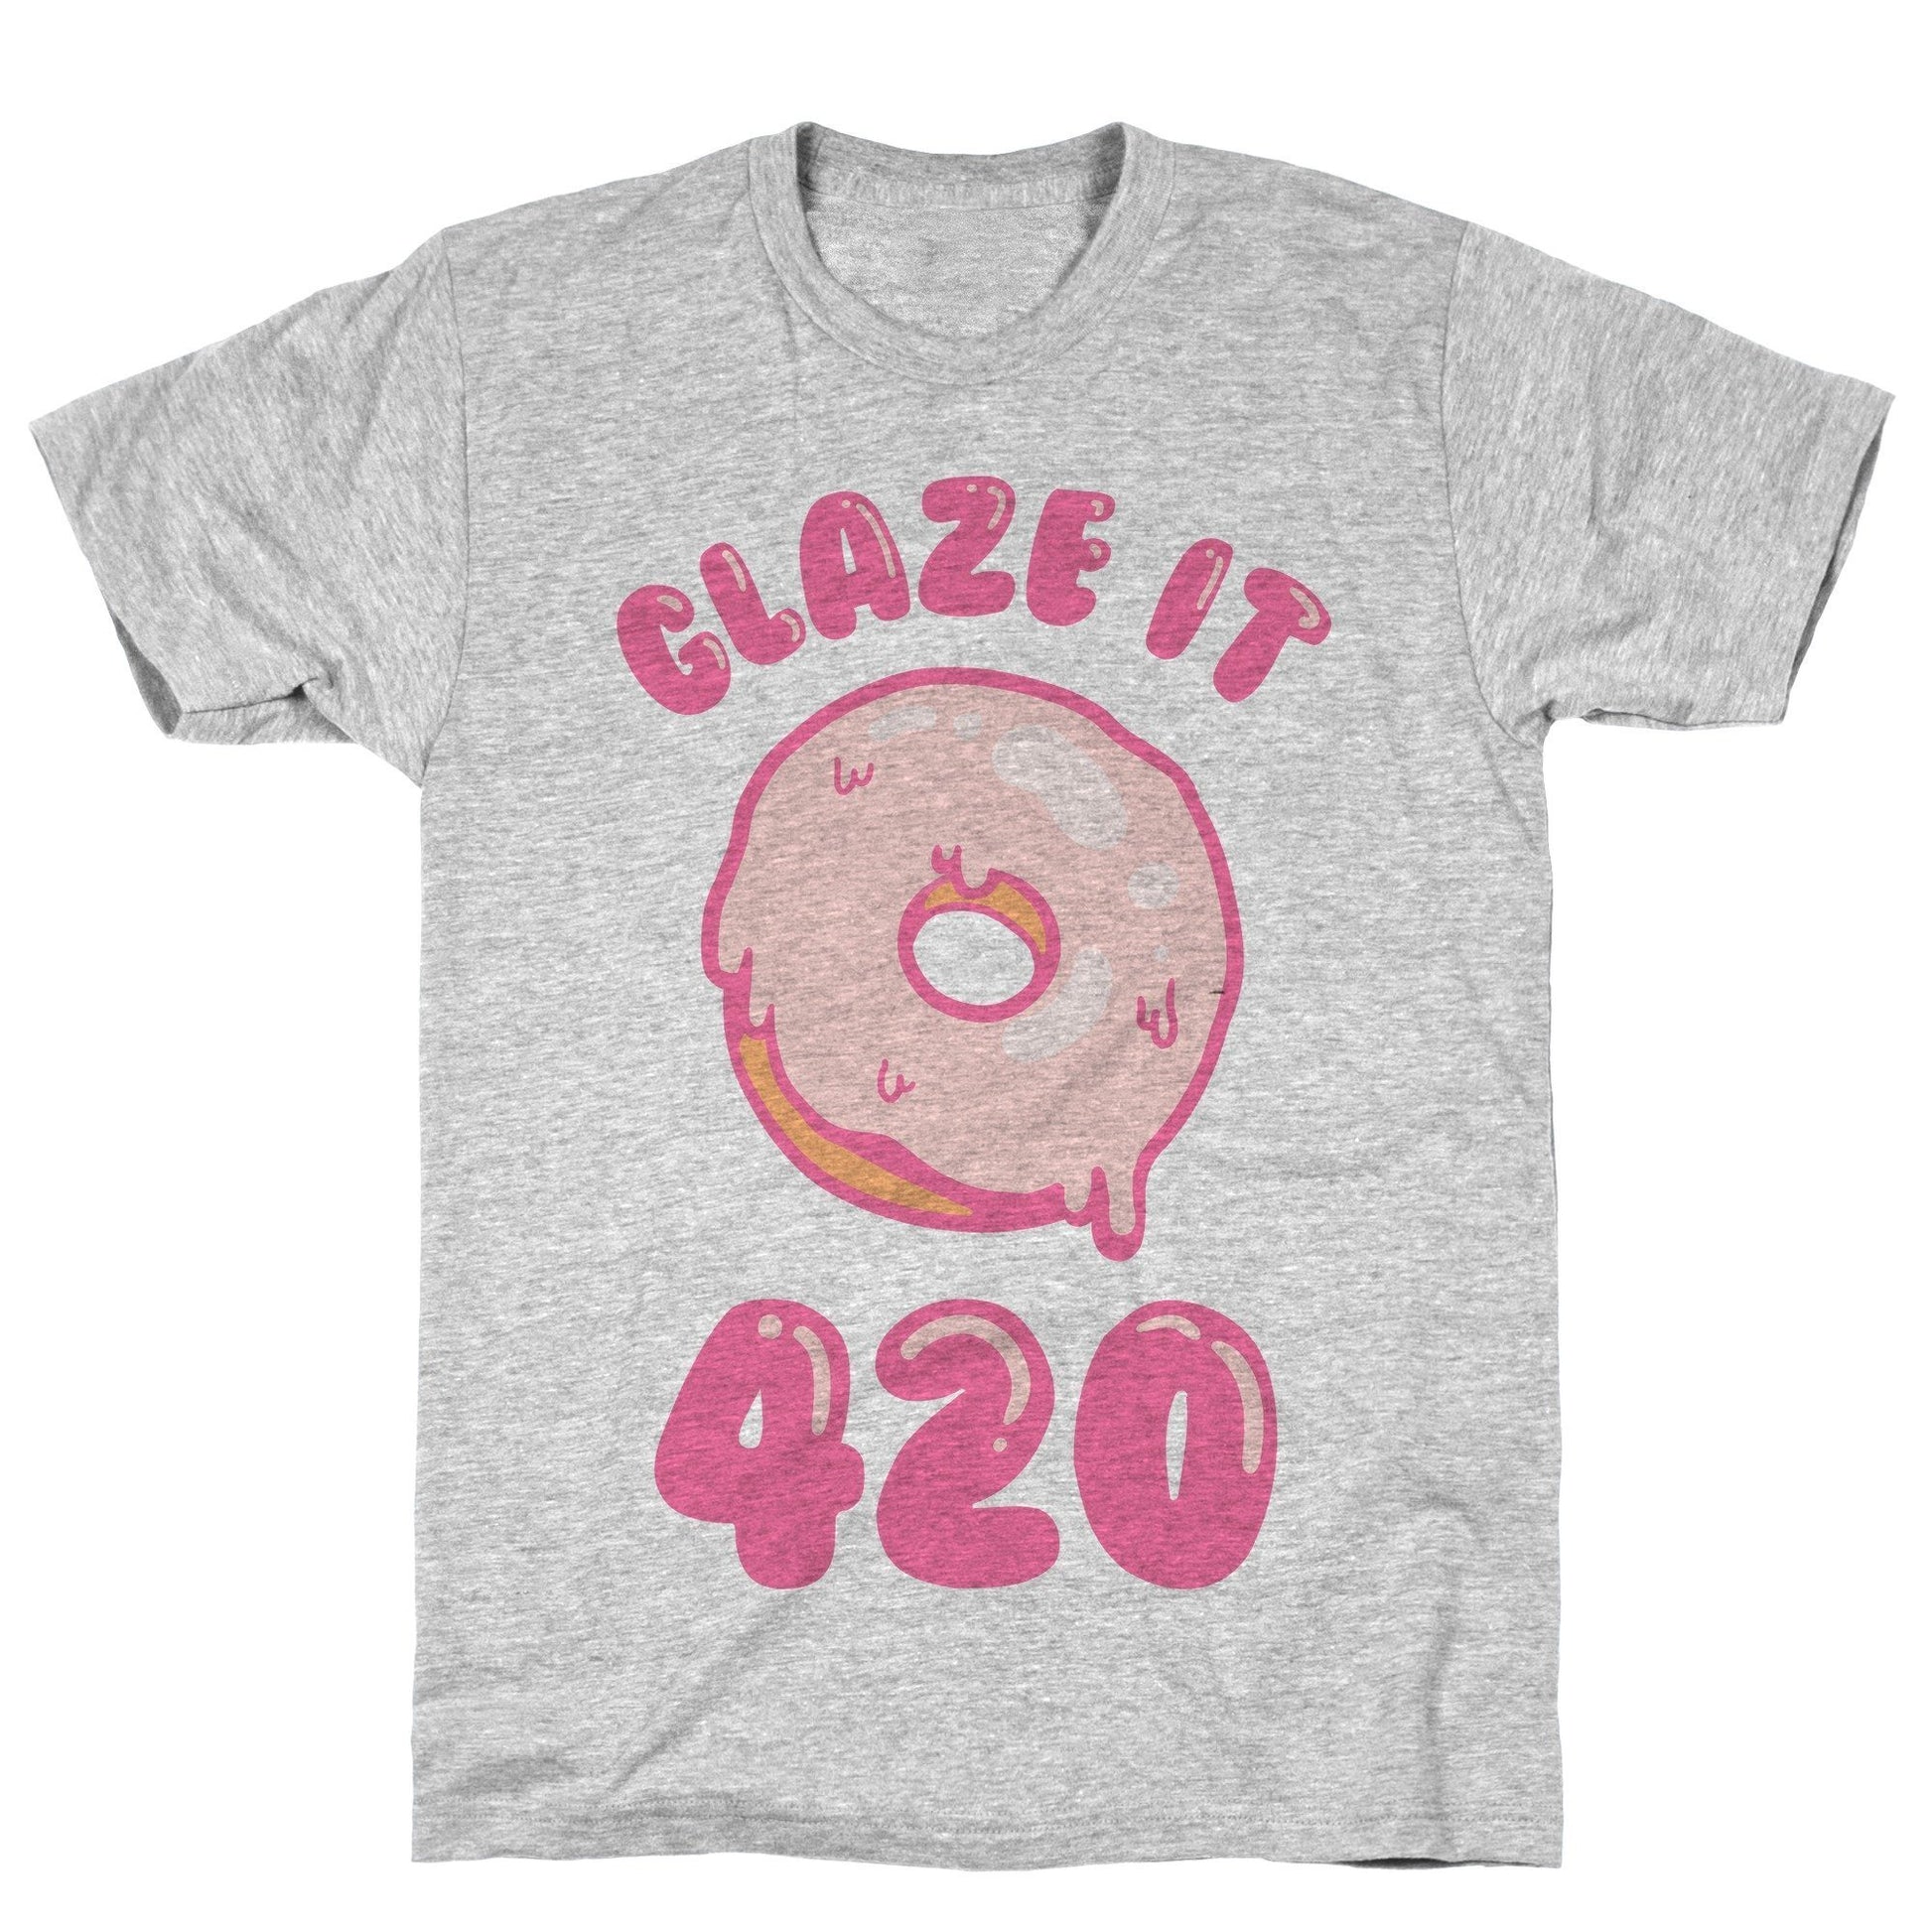 Glaze It 420 Donut Athletic Gray Unisex Cotton Tee Flower Power Packages 